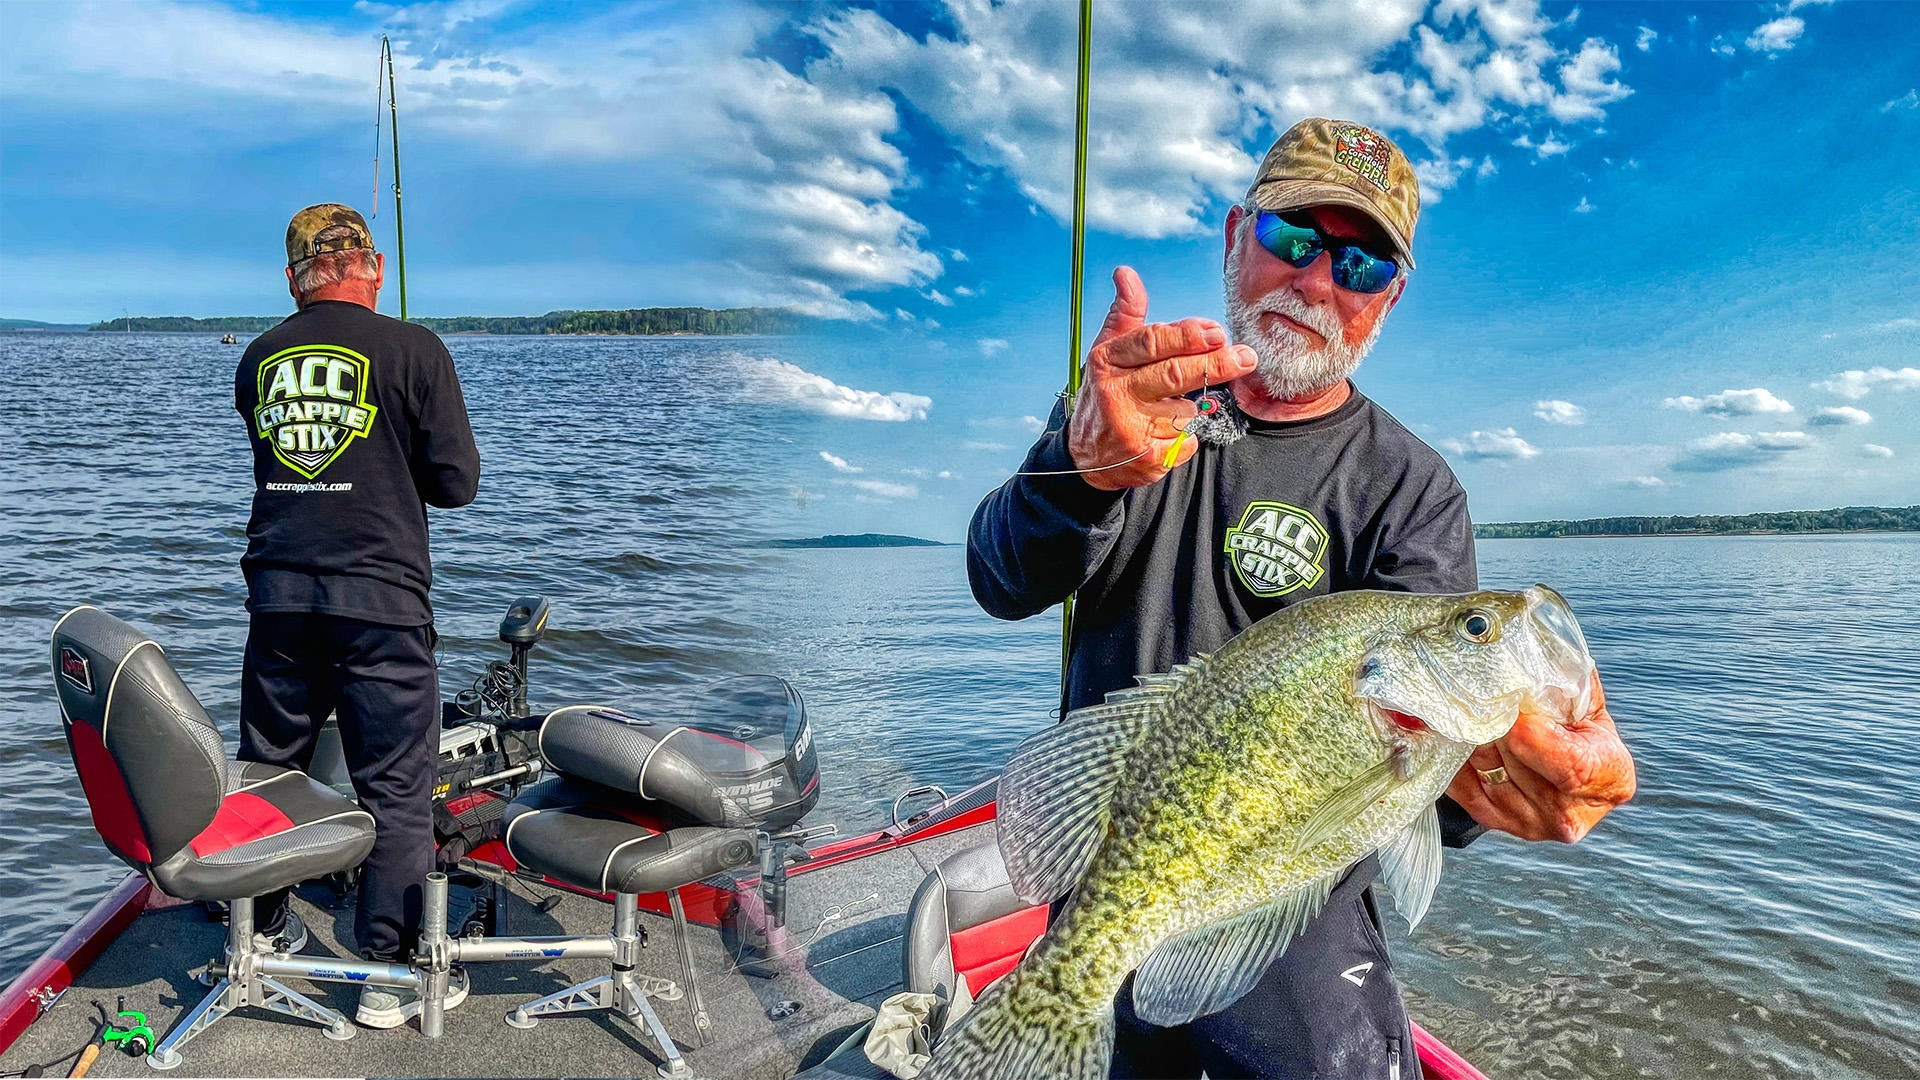 Catch More Crappies With Slip Bobbers Rigging And Tactics, 56% OFF